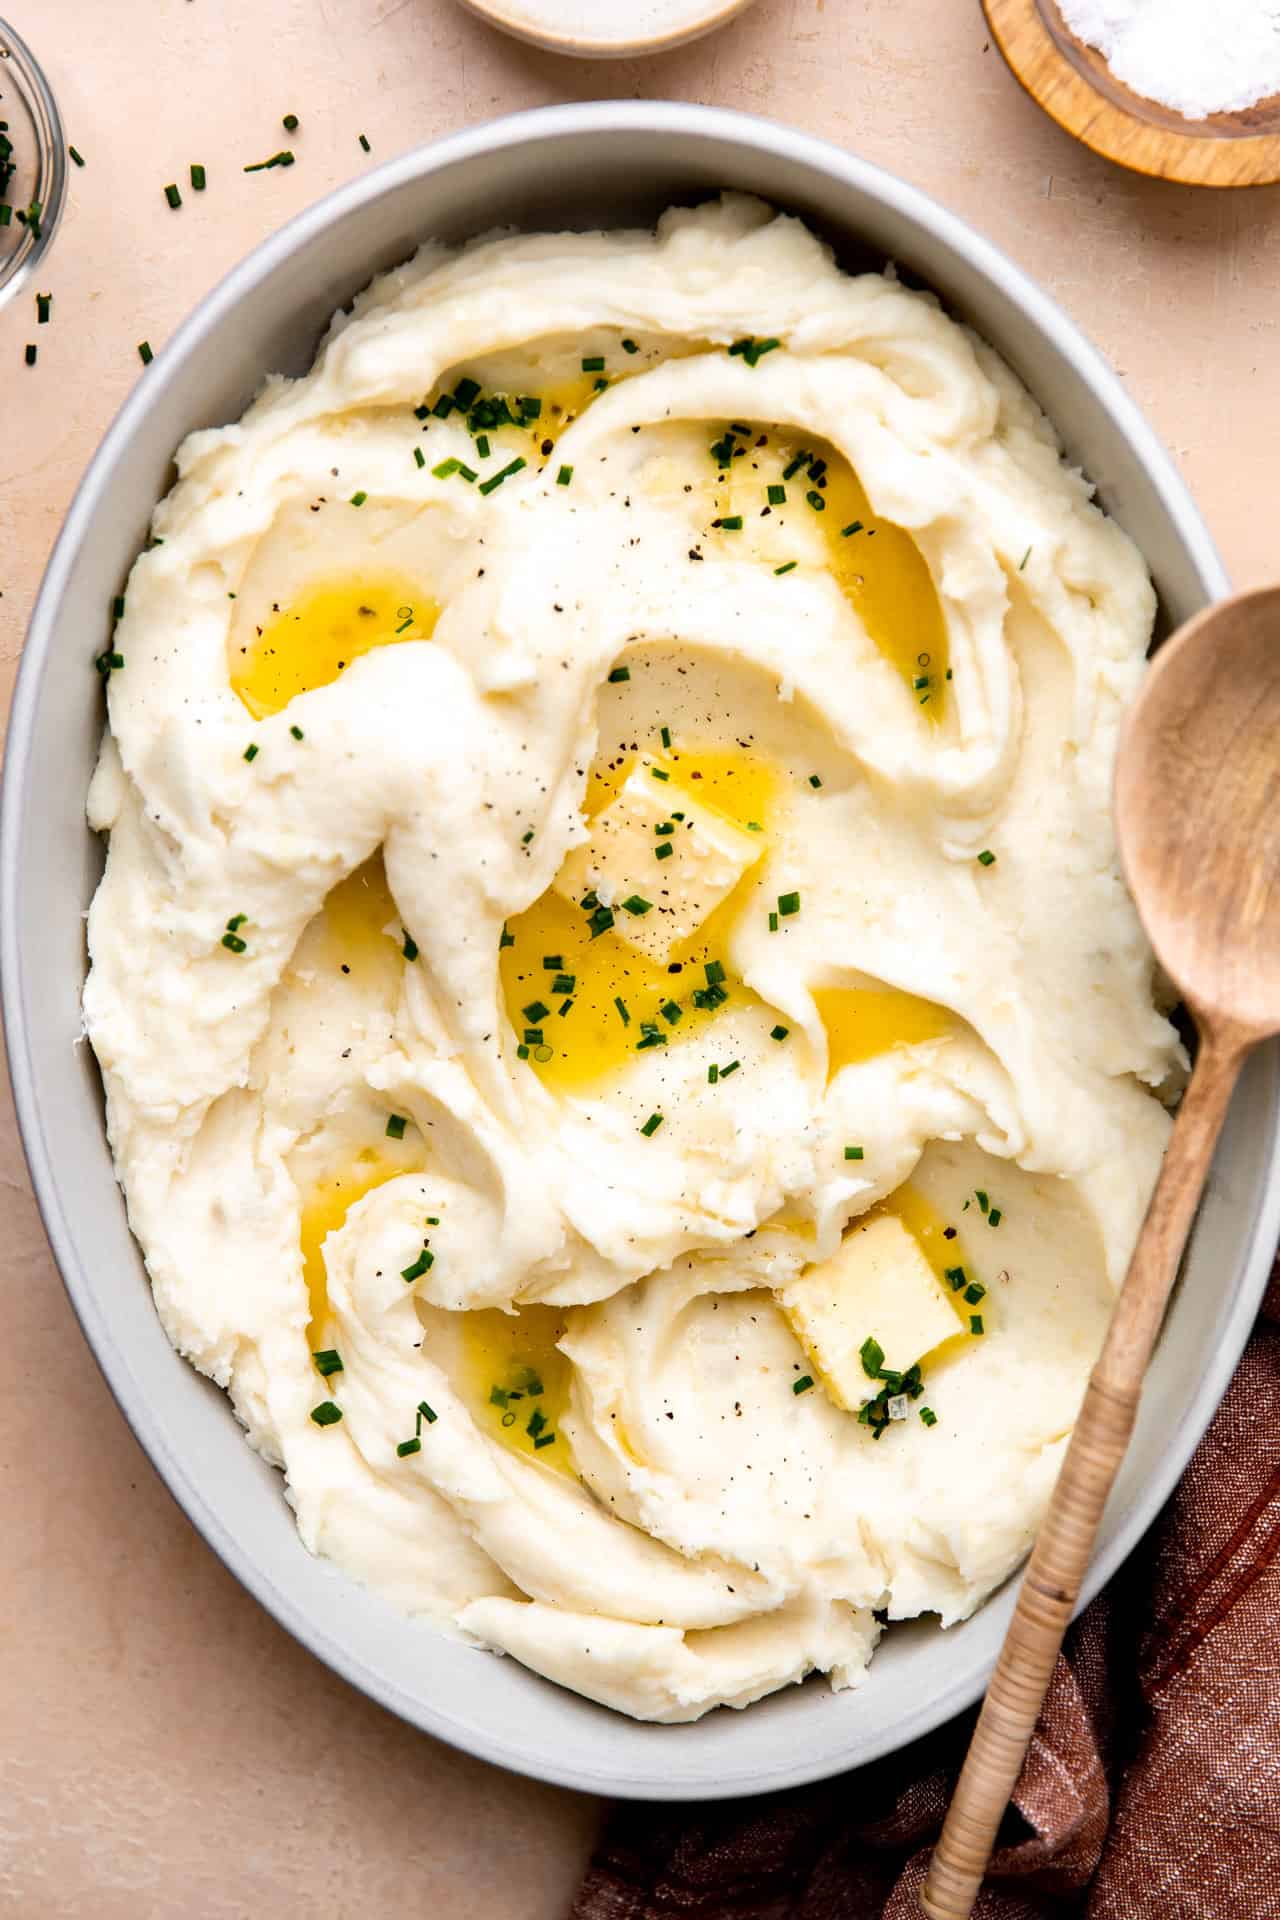 Dish filled with creamy mashed potatoes swirled and topped with melted butter and fresh chives.